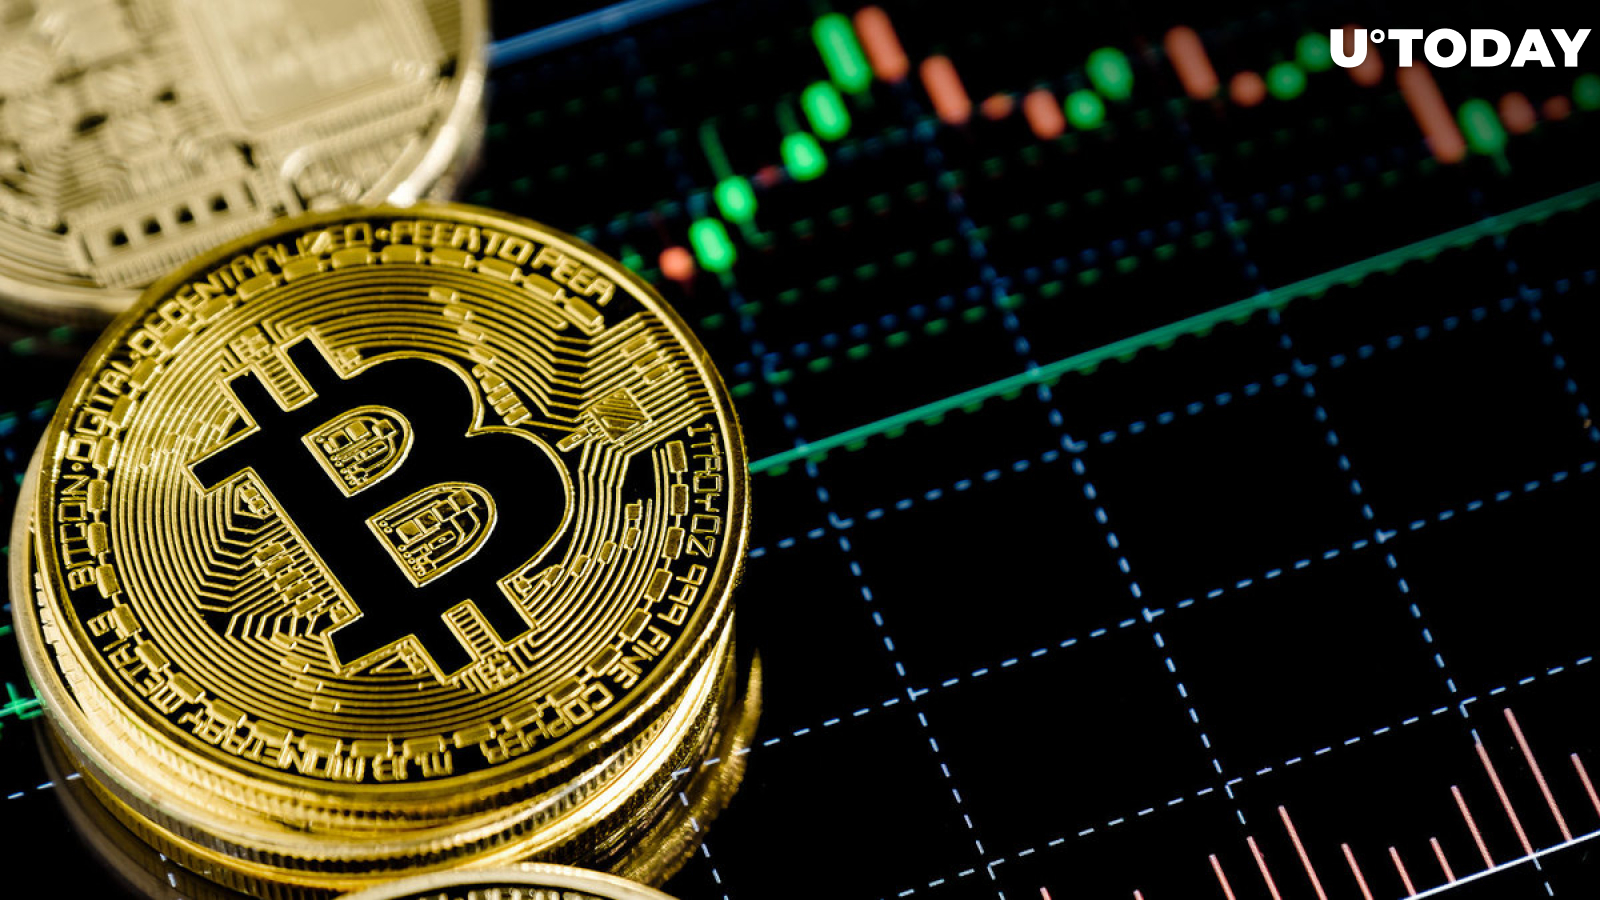 3 Lessons Learned From Recent Bitcoin (BTC) Price Volatility